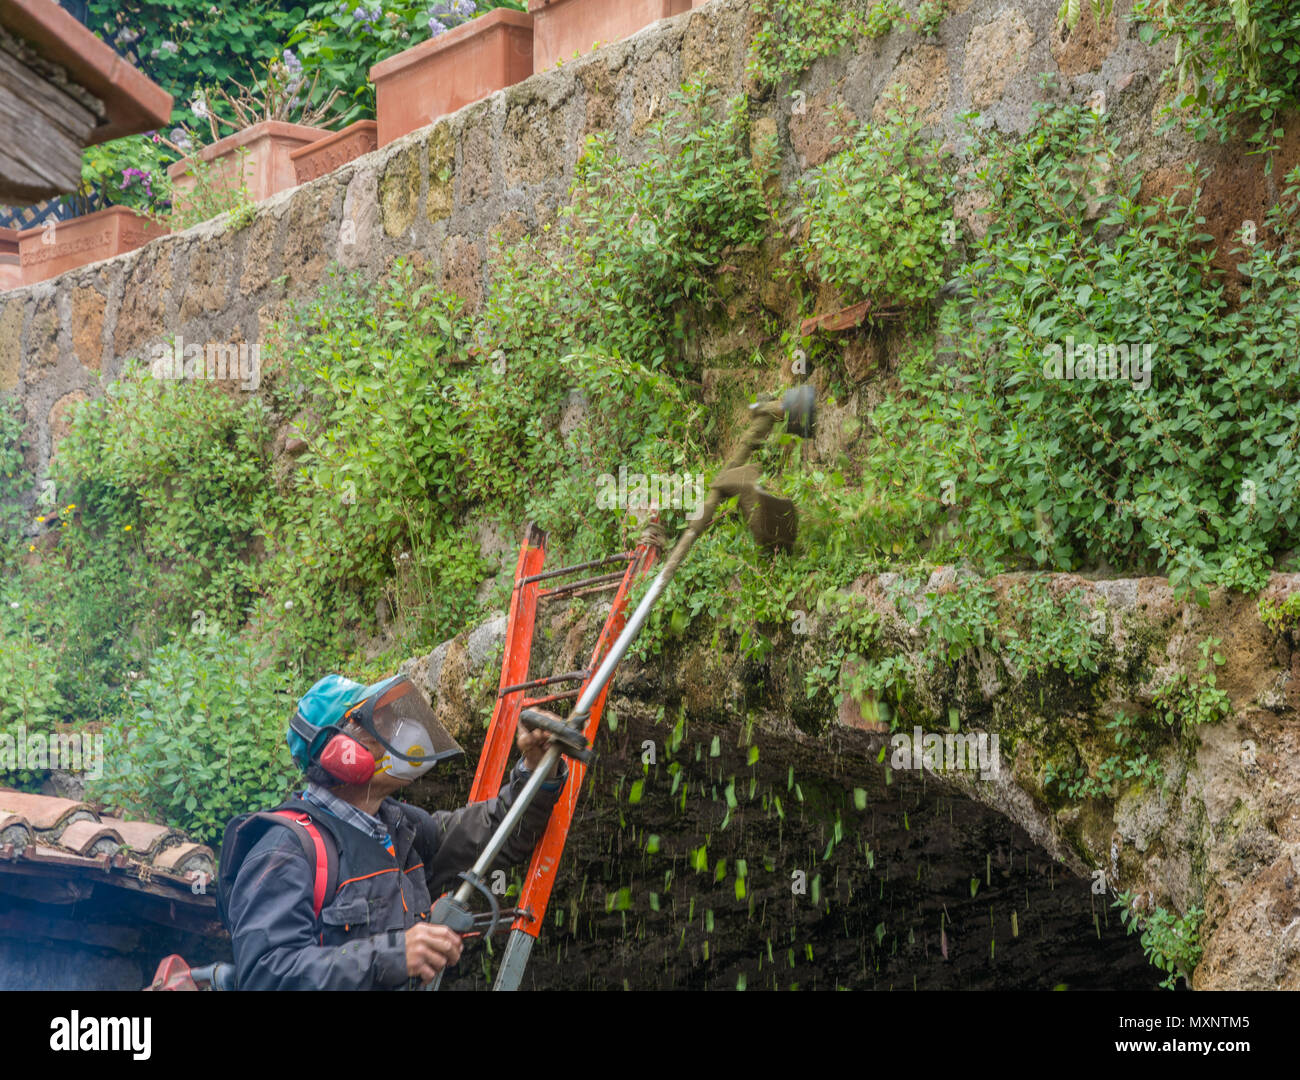 Tuscania (Viterbo), Italy - May 2, 2018: municipal gardener using strimmer in an archaeological site in Tuscania, italy Stock Photo